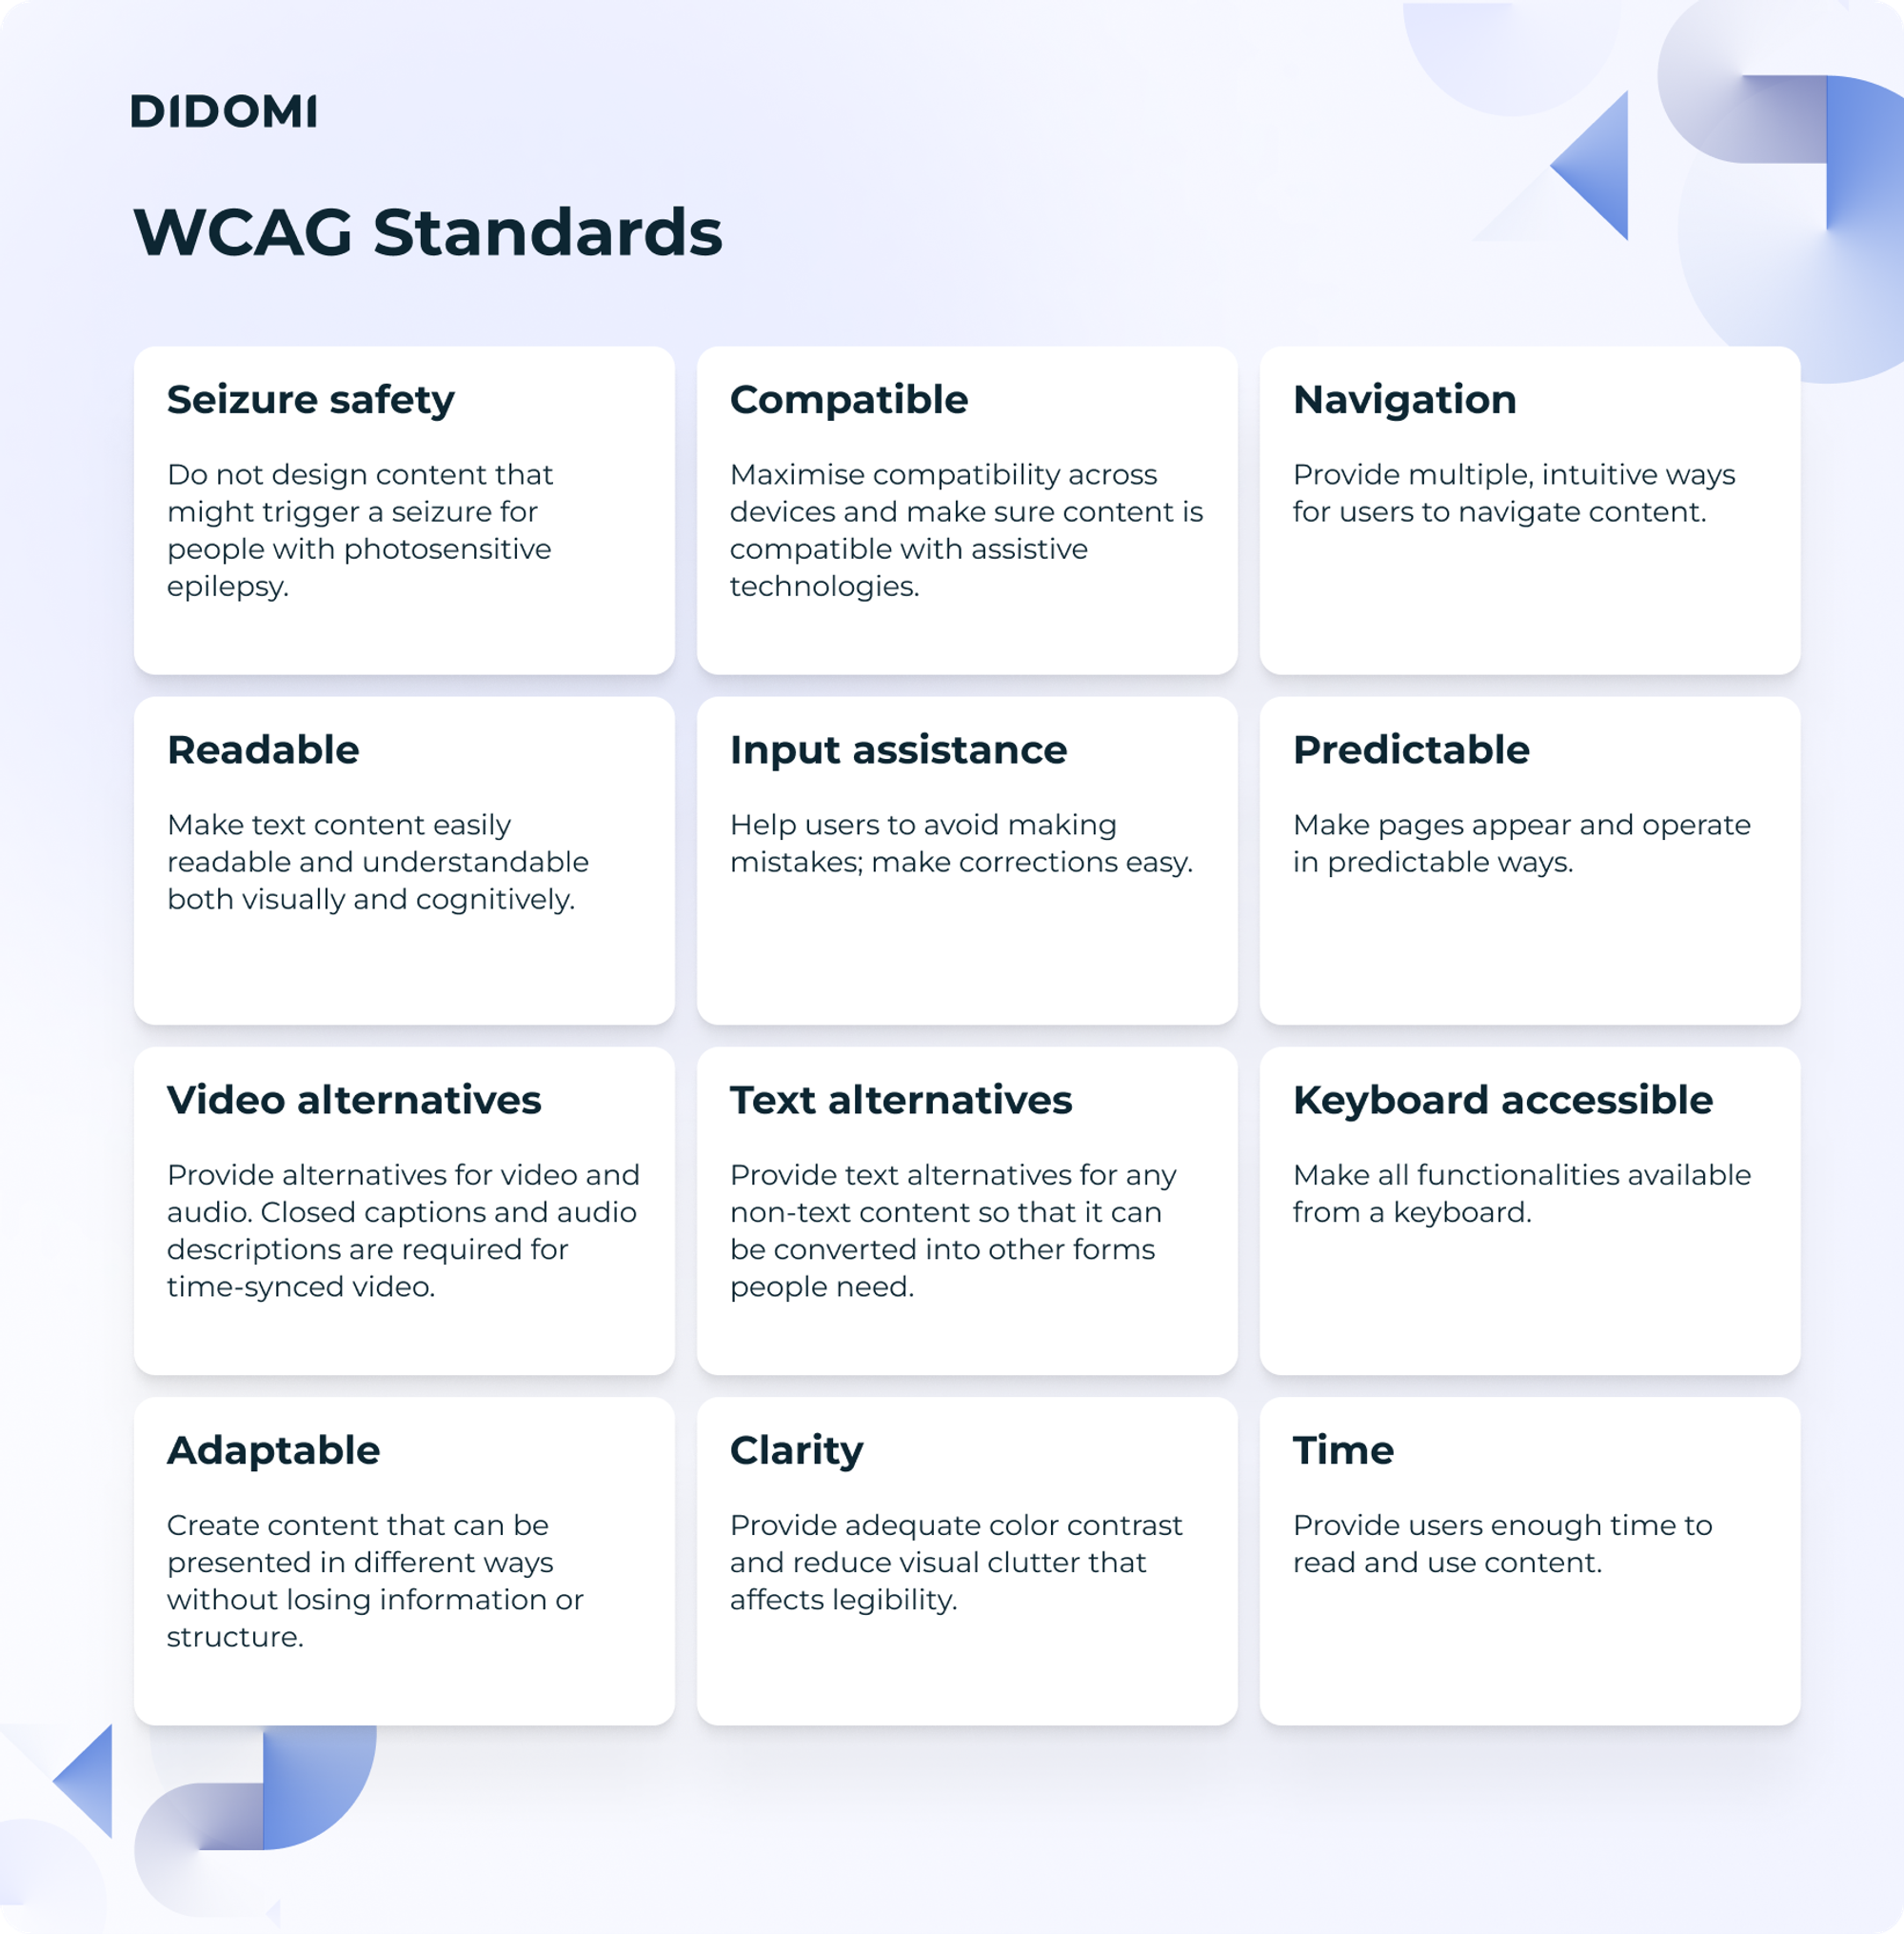 A table of the various WCAG standards, listing each standard and a short description. Seizure safety: Do not design content that might trigger a seizure for people with photosensitive epilepsy. Compatible: Maximise compatibility across devices and make sure content is compatible with assistive technologies. Navigation: Provide multiple, intuitive ways for users to navigate content. Readable: Make text content easily readable and understandable both visually and cognitively. Input assistance: Help users to avoid making mistakes; make corrections easy. Predictable: Make pages appear and operate in predictable ways. Video alternatives: Provide alternatives for video and audio. Closed captions and audio descriptions are required for time-synced video. Text alternatives: Provide text alternatives for any non-text content so that it can be converted into other forms people need. Keyboard accessible: Make all functionalities available from a keyboard. Adaptable: Create content that can be presented in different ways without losing information or structure. Clarity: Provide adequate color contrast and reduce visual clutter that affects legibility. Time: Provide users enough time to read and use content.